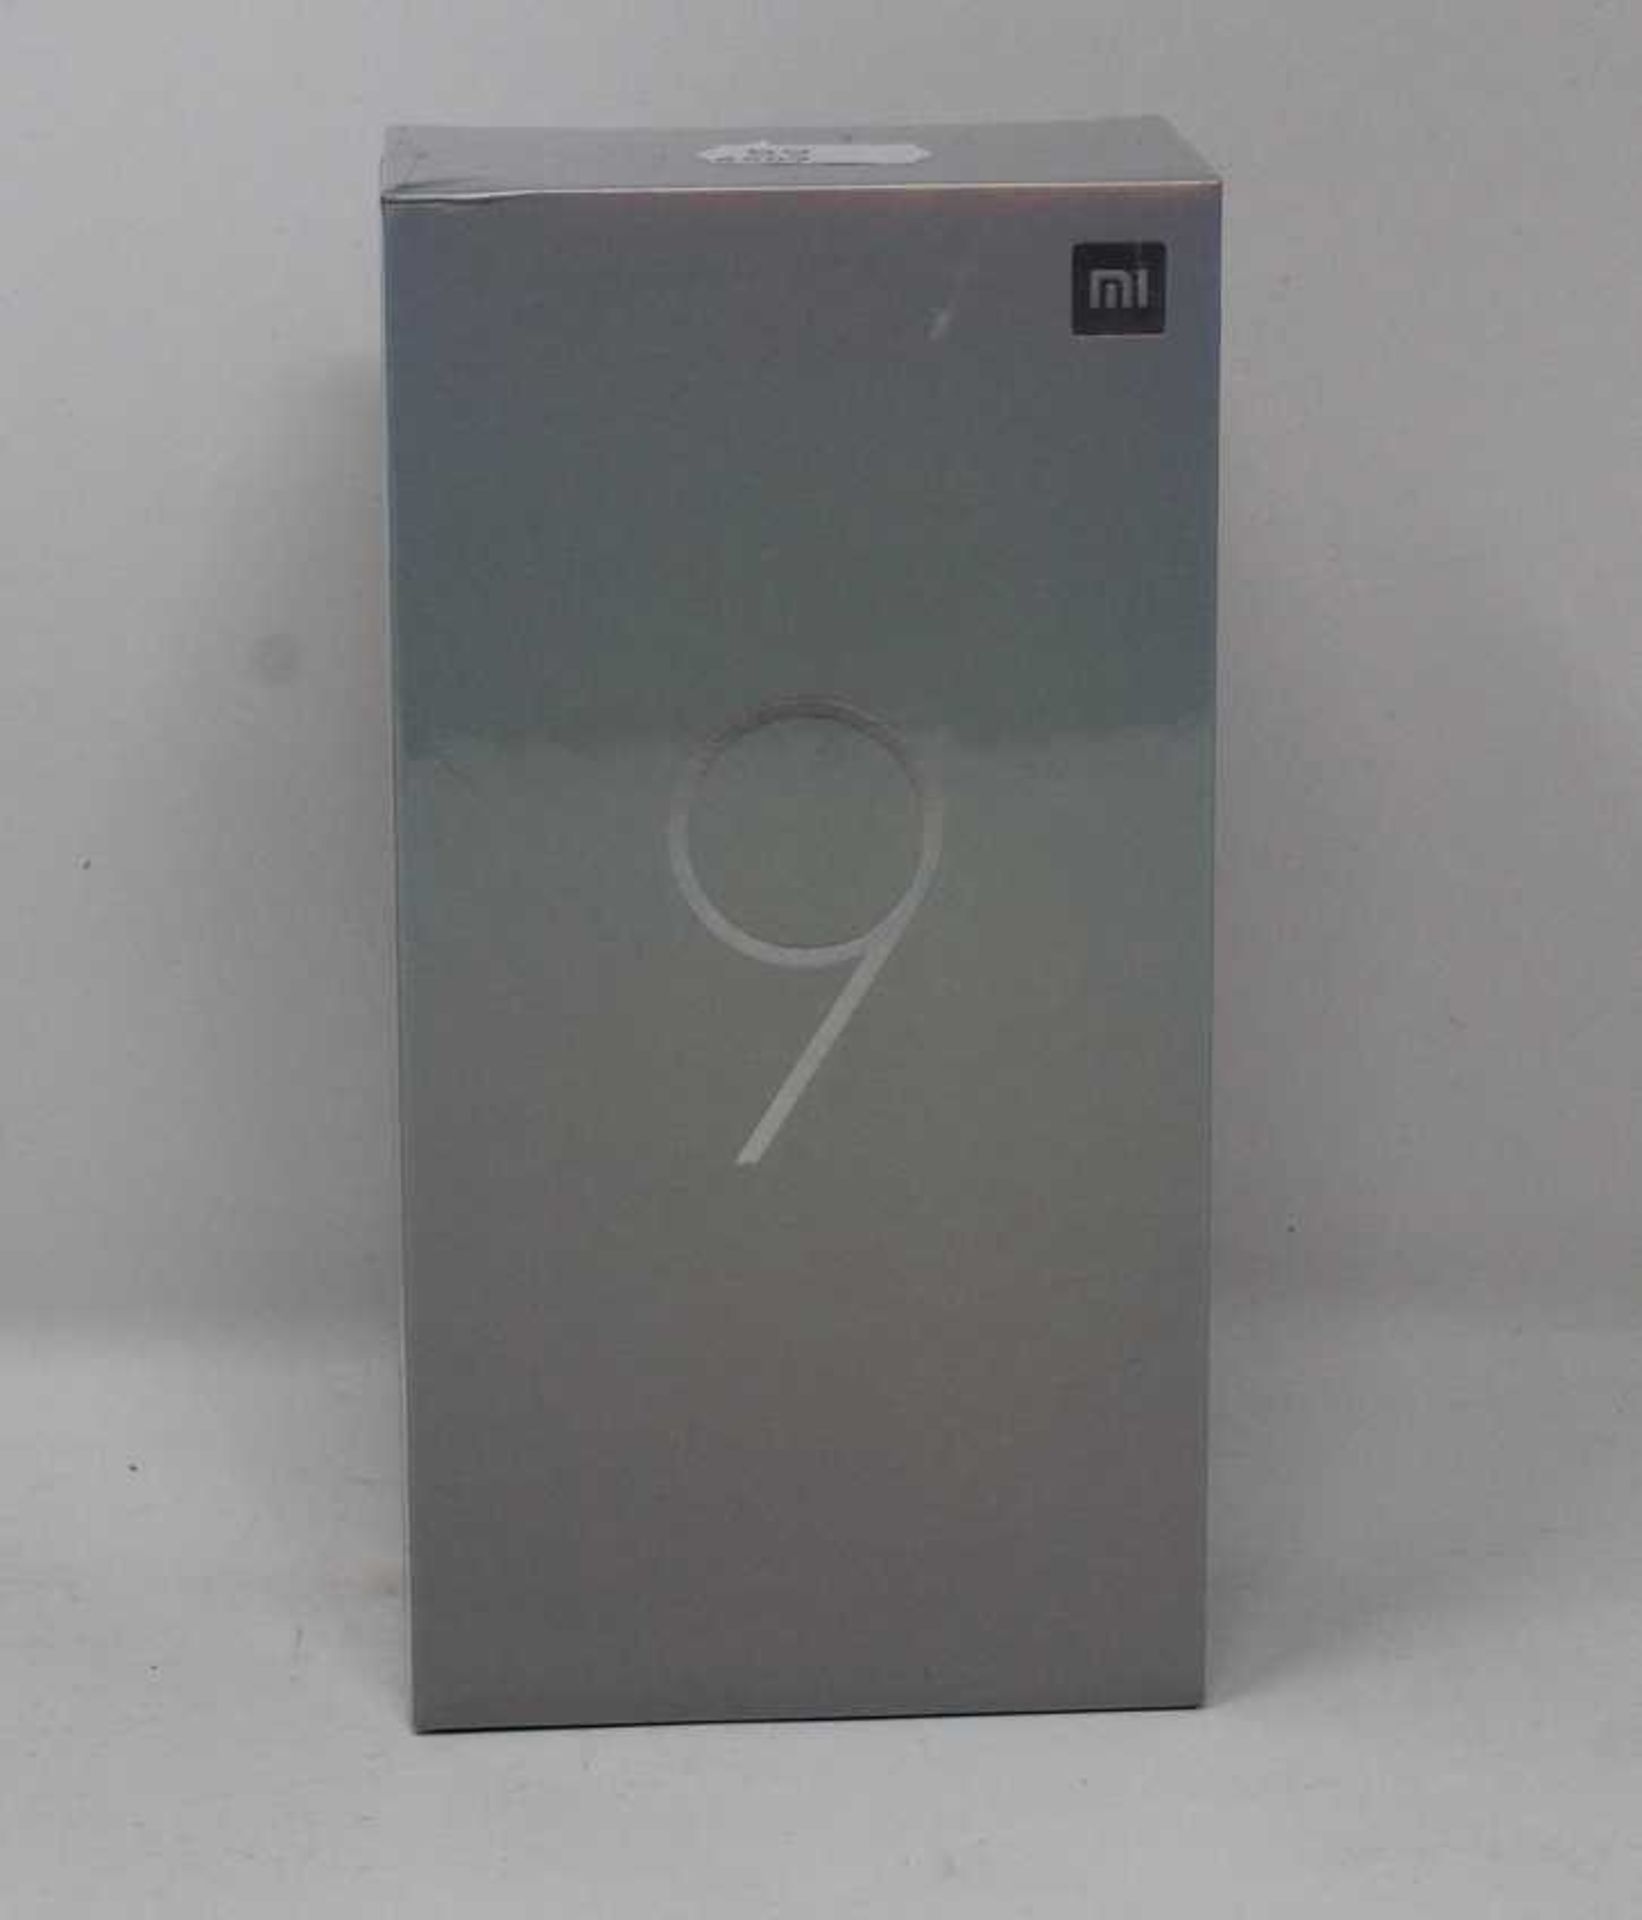 A boxed as new Xiaomi Mi 9 Global Version 6GB RAM 128GB Storage Android Smartphone in Piano Black